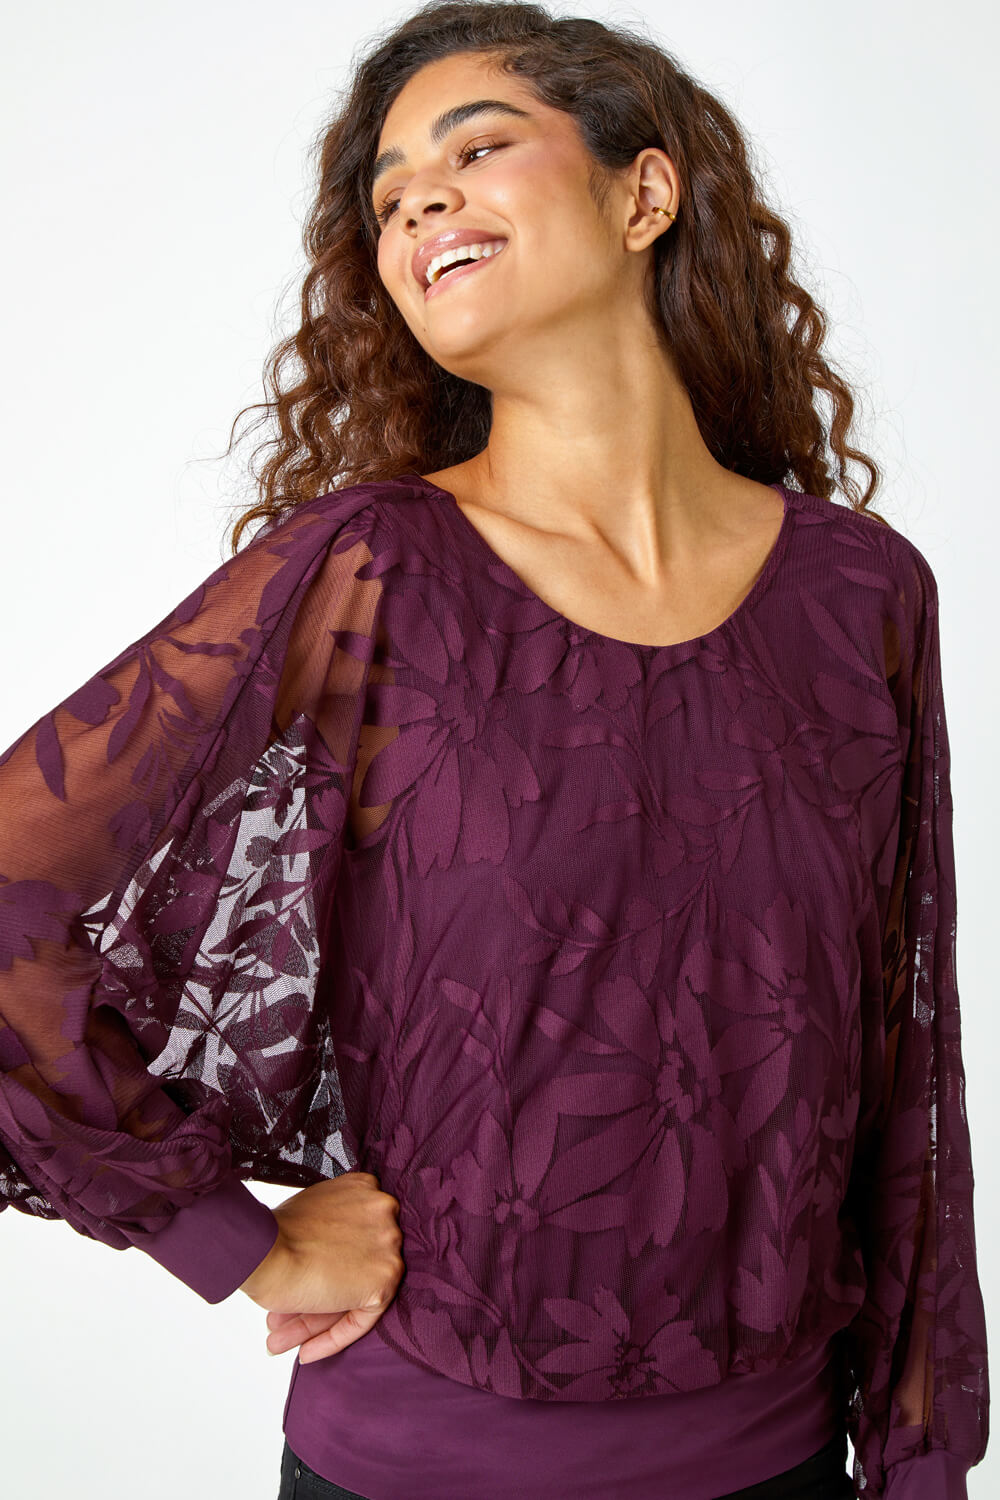 Plum Textured Floral Blouson Stretch Top, Image 4 of 5